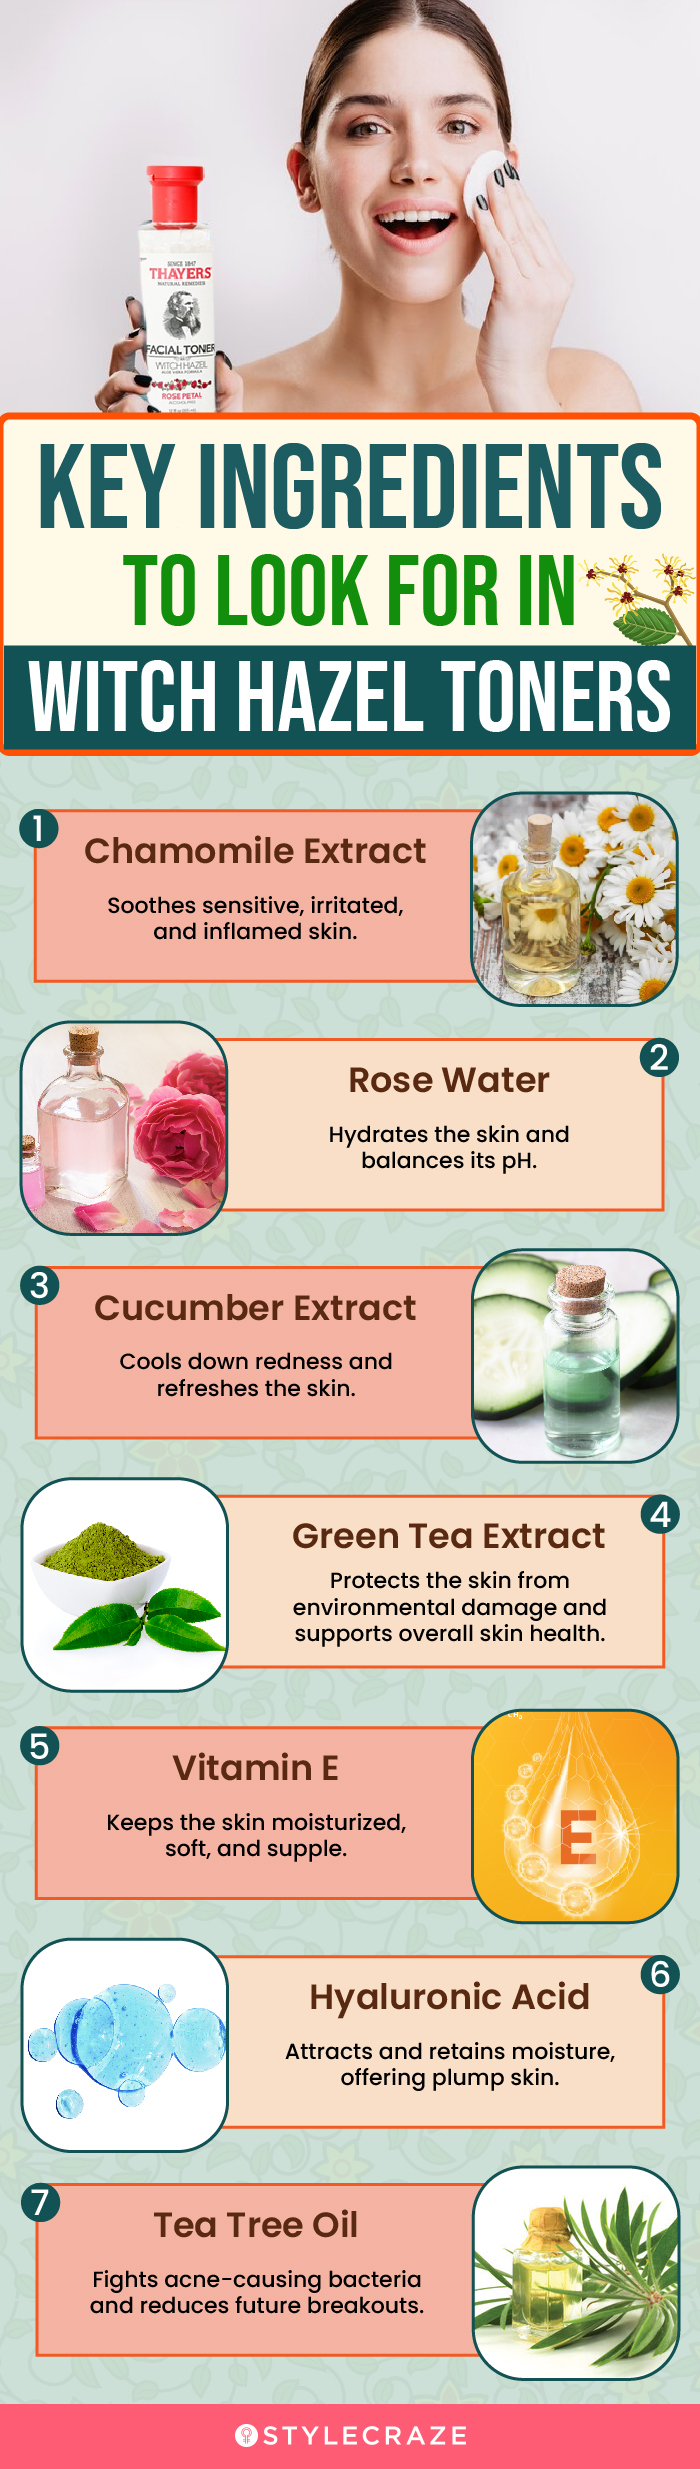 Key Ingredients To Look For In Witch Hazel Toners (infographic)